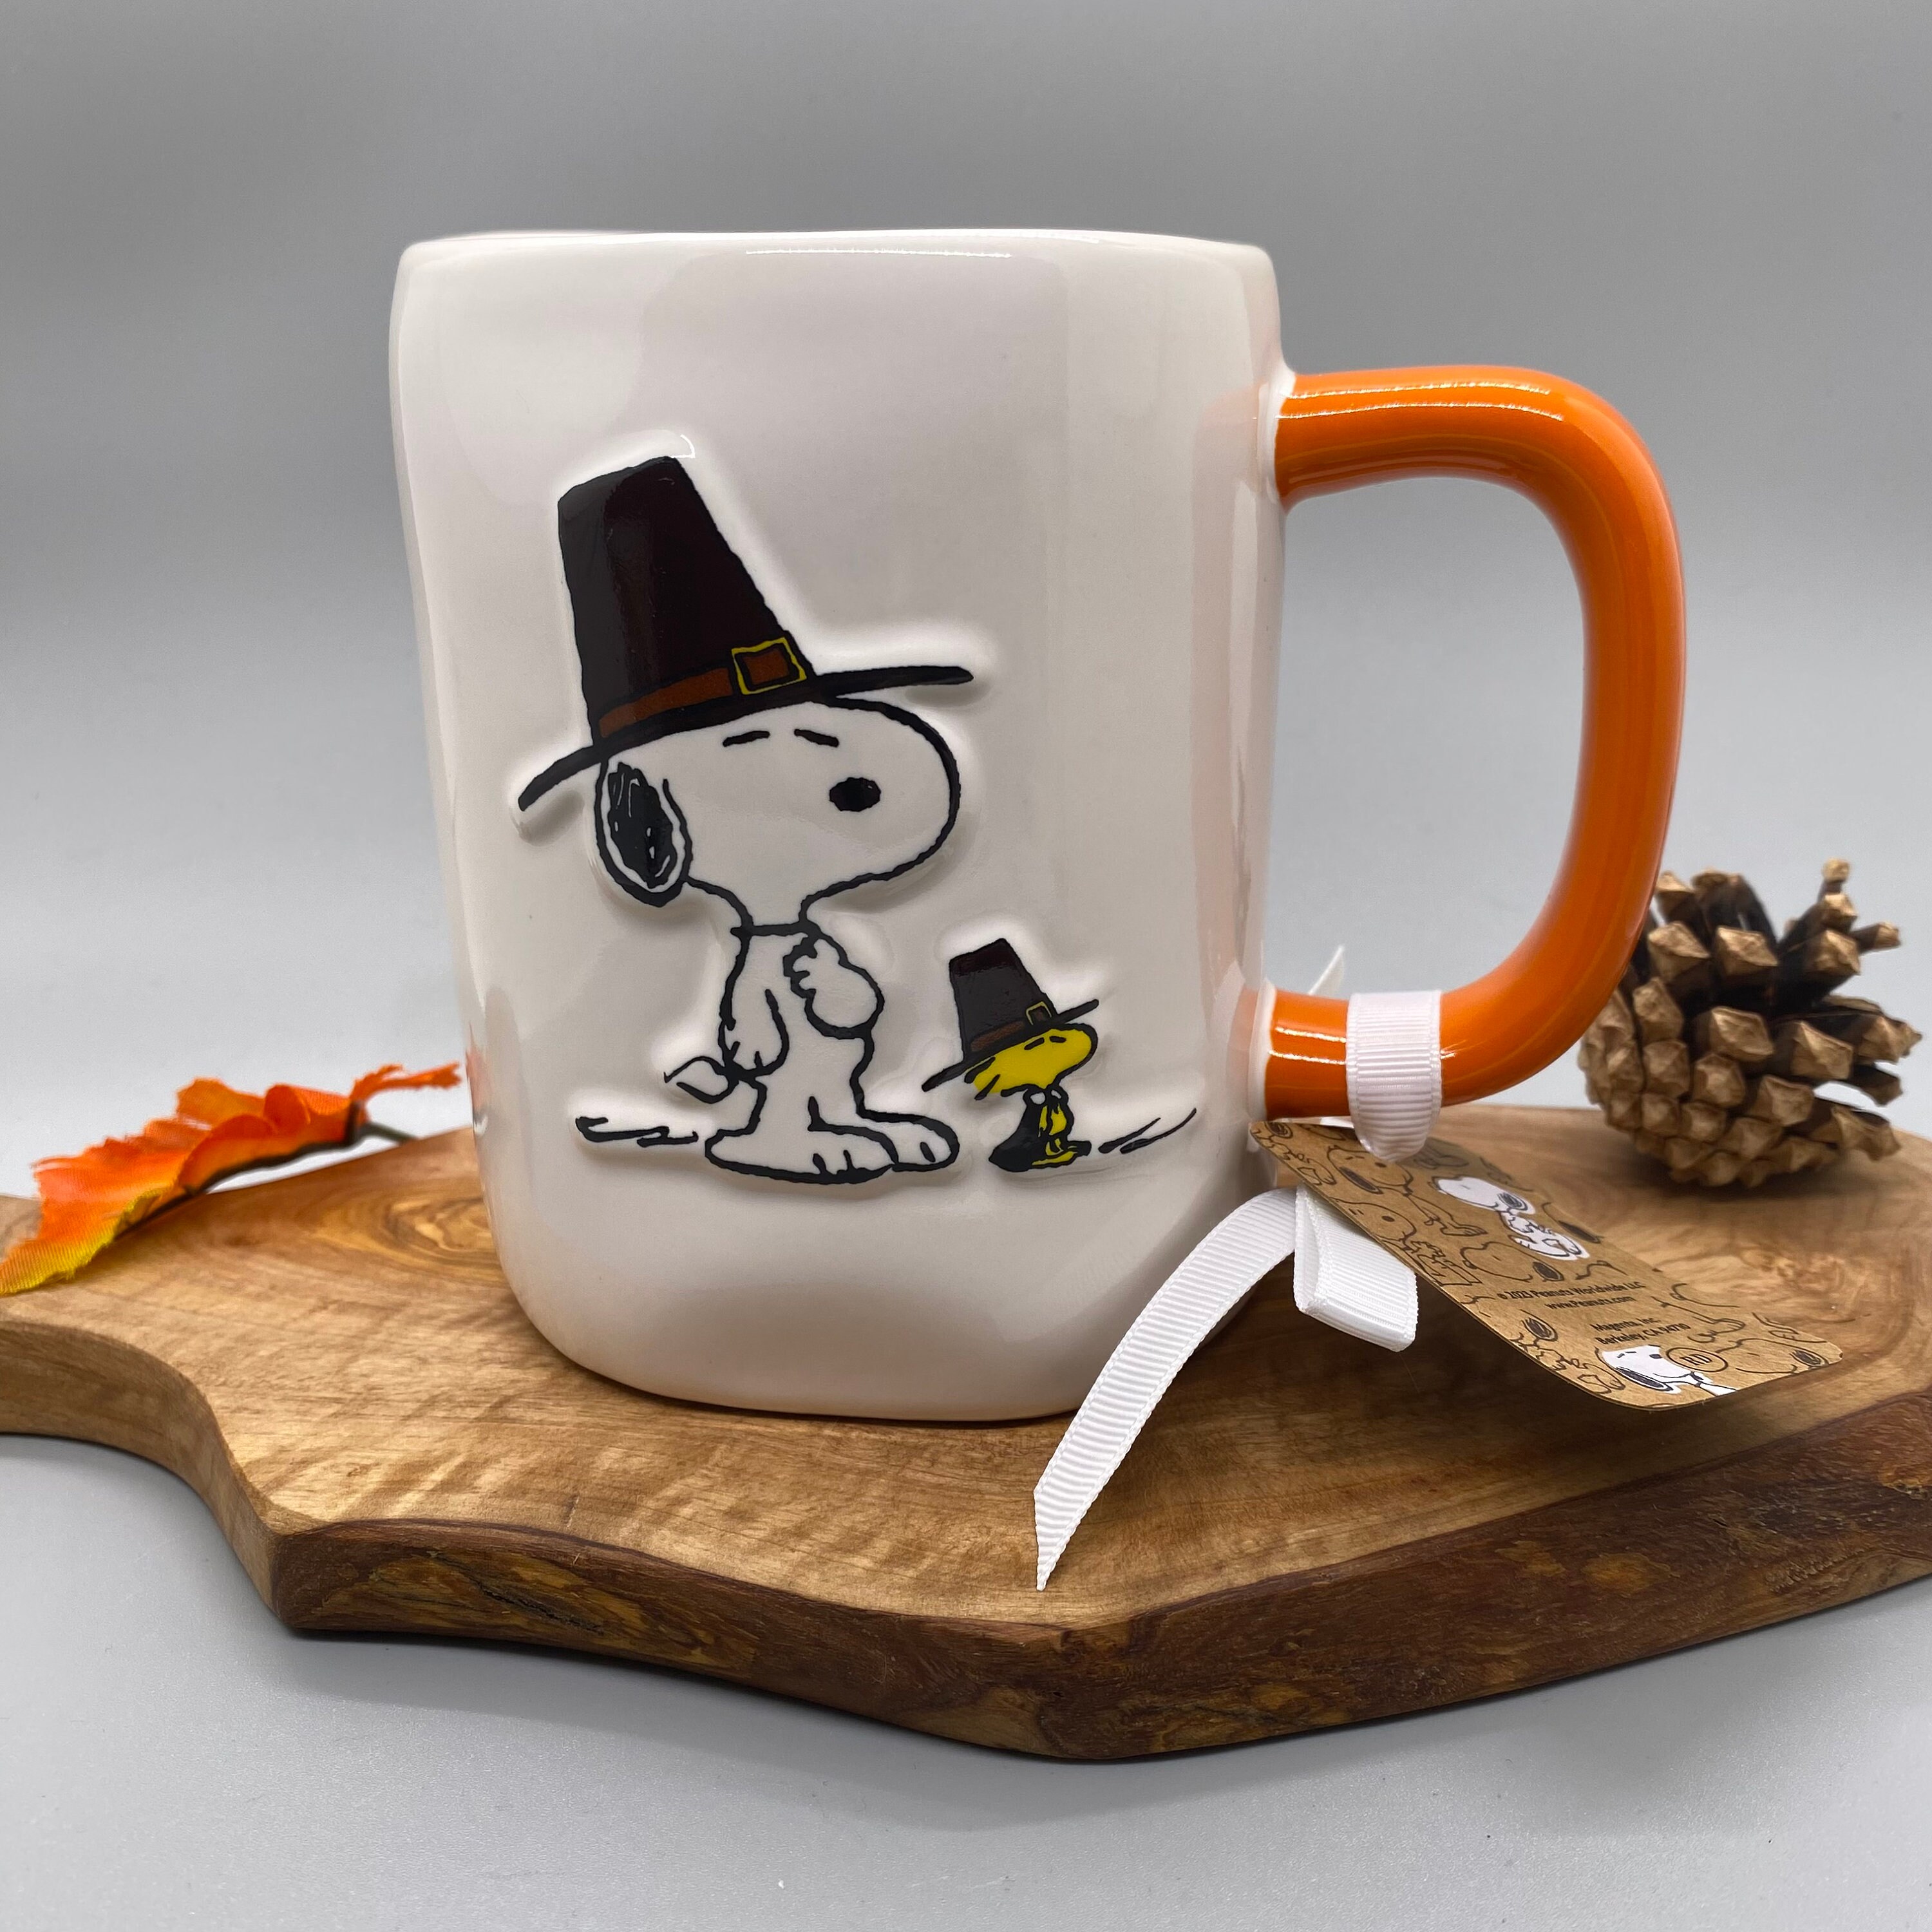 New Rae Dunn x Peanut's Snoopy Valentines Day Heart Measuring cup